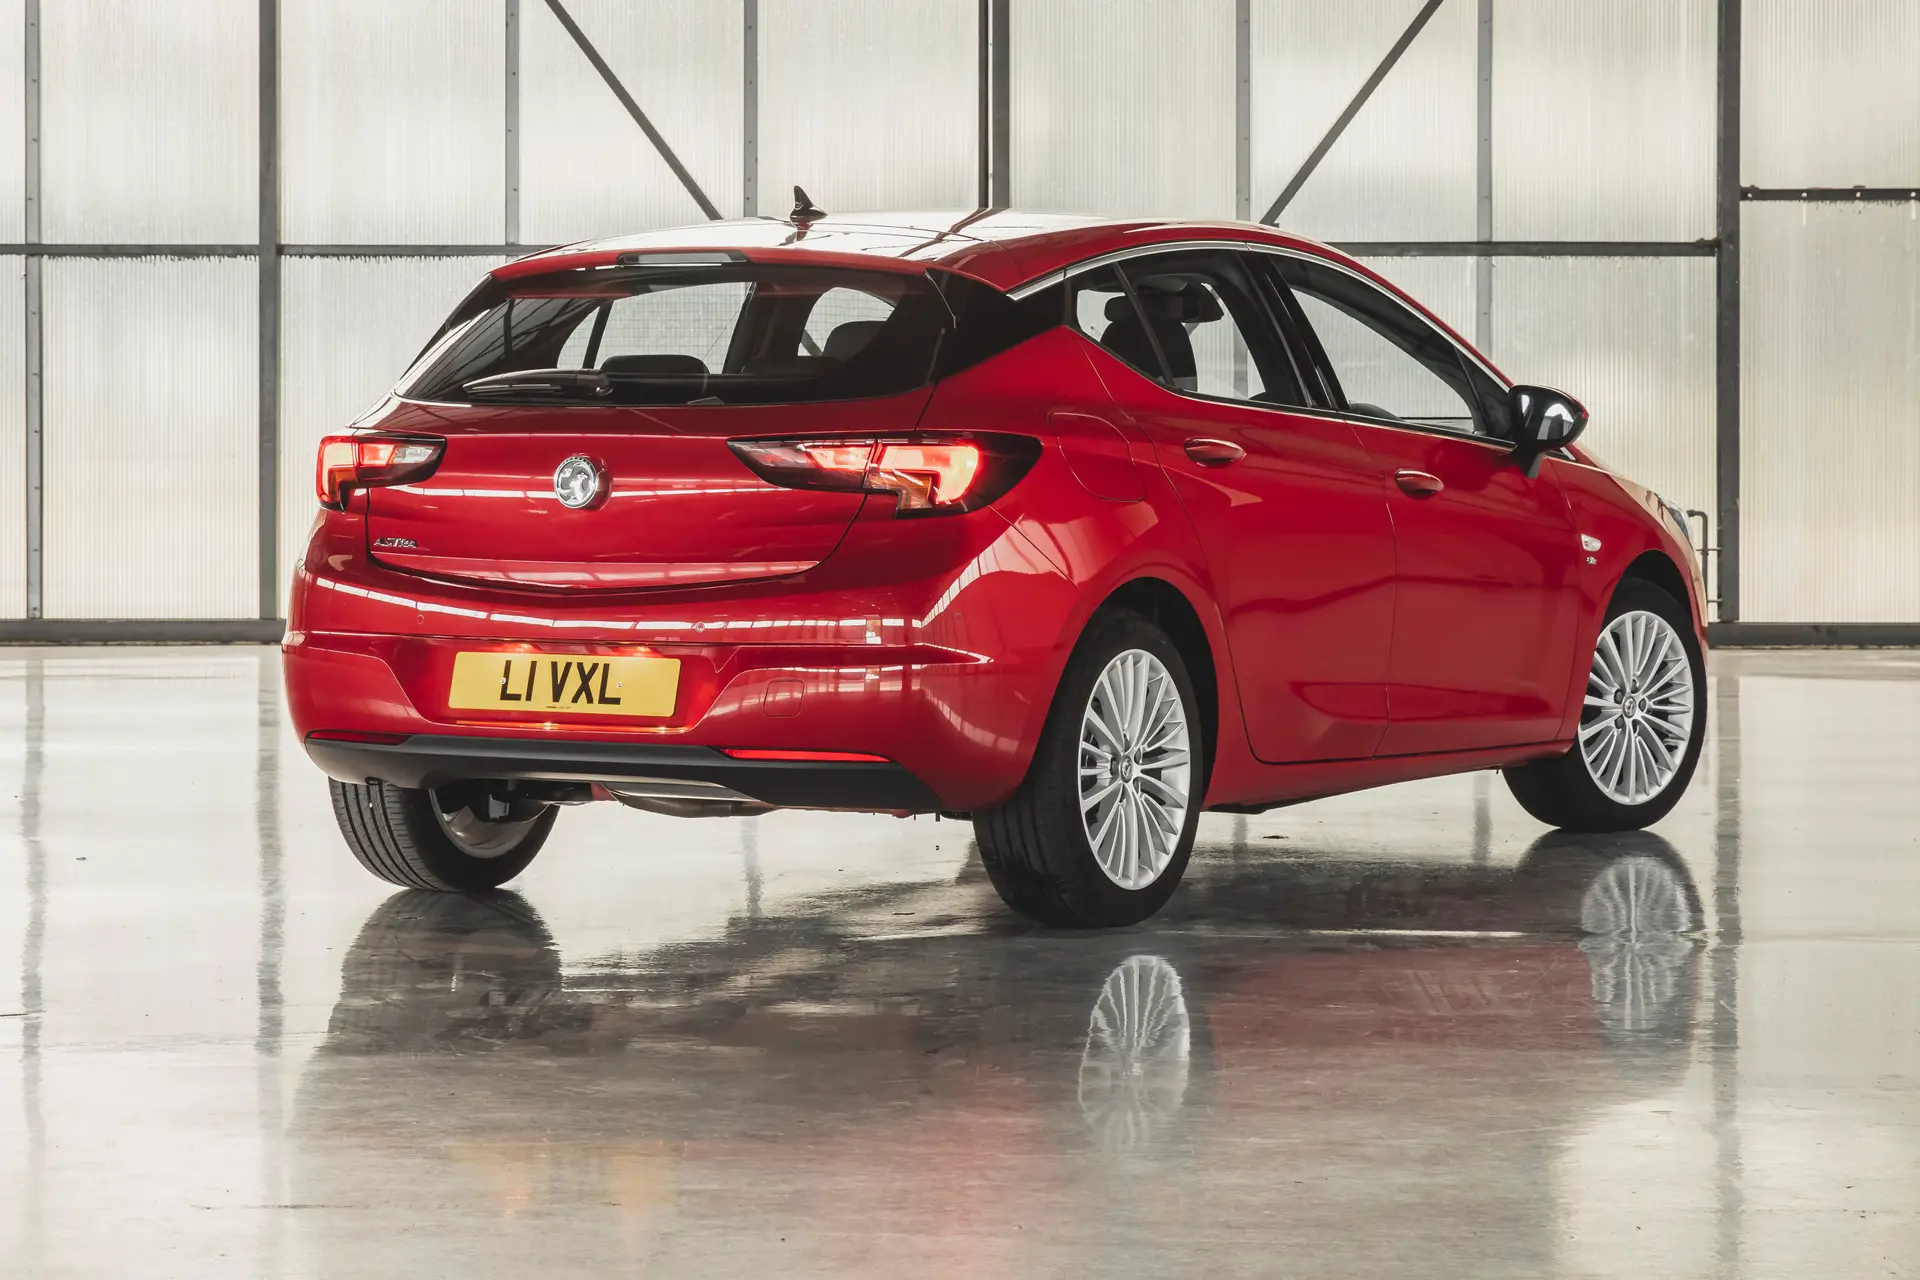 Used Vauxhall Astra review